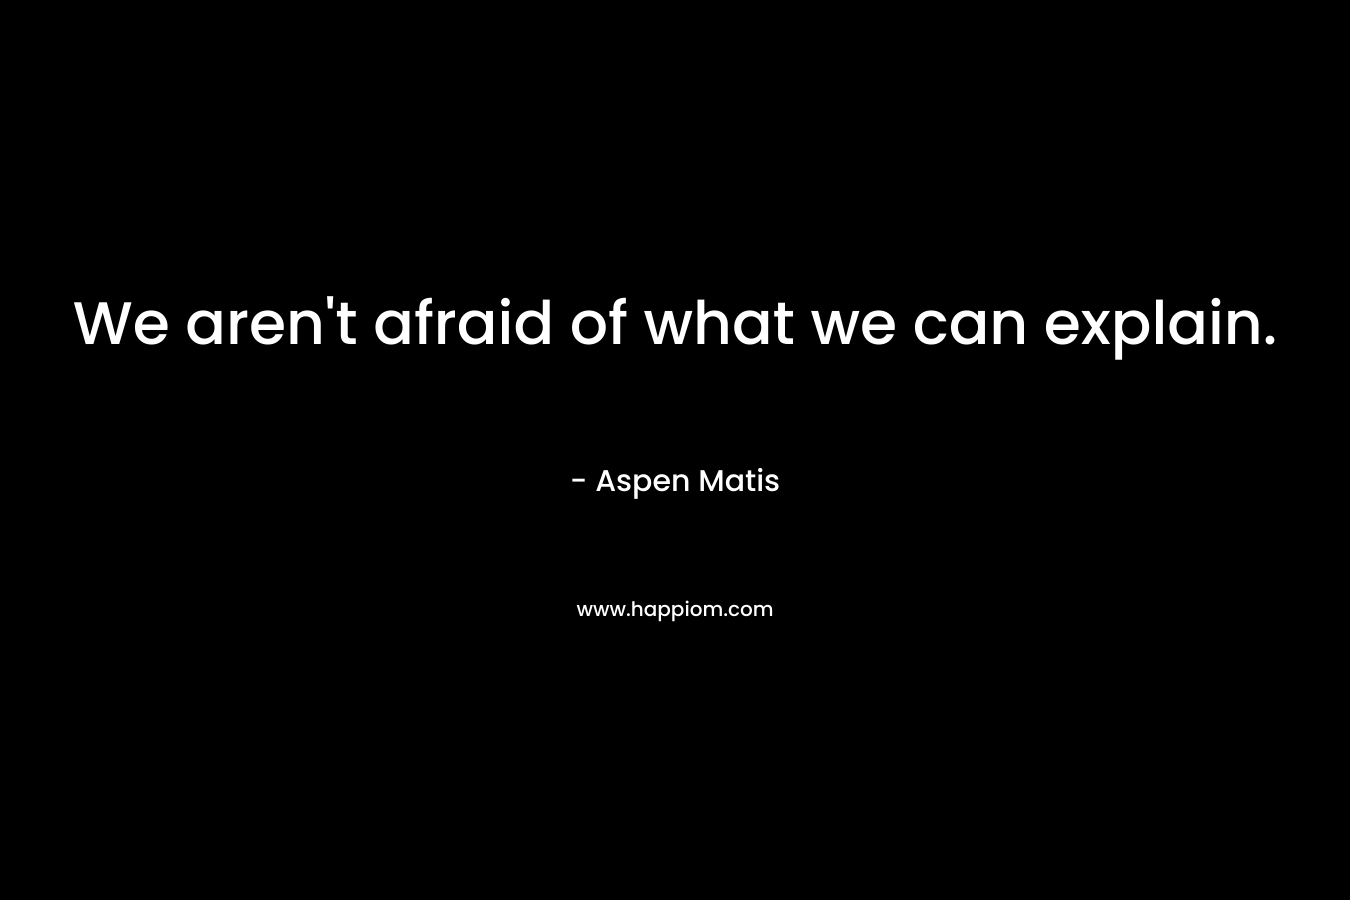 We aren't afraid of what we can explain.